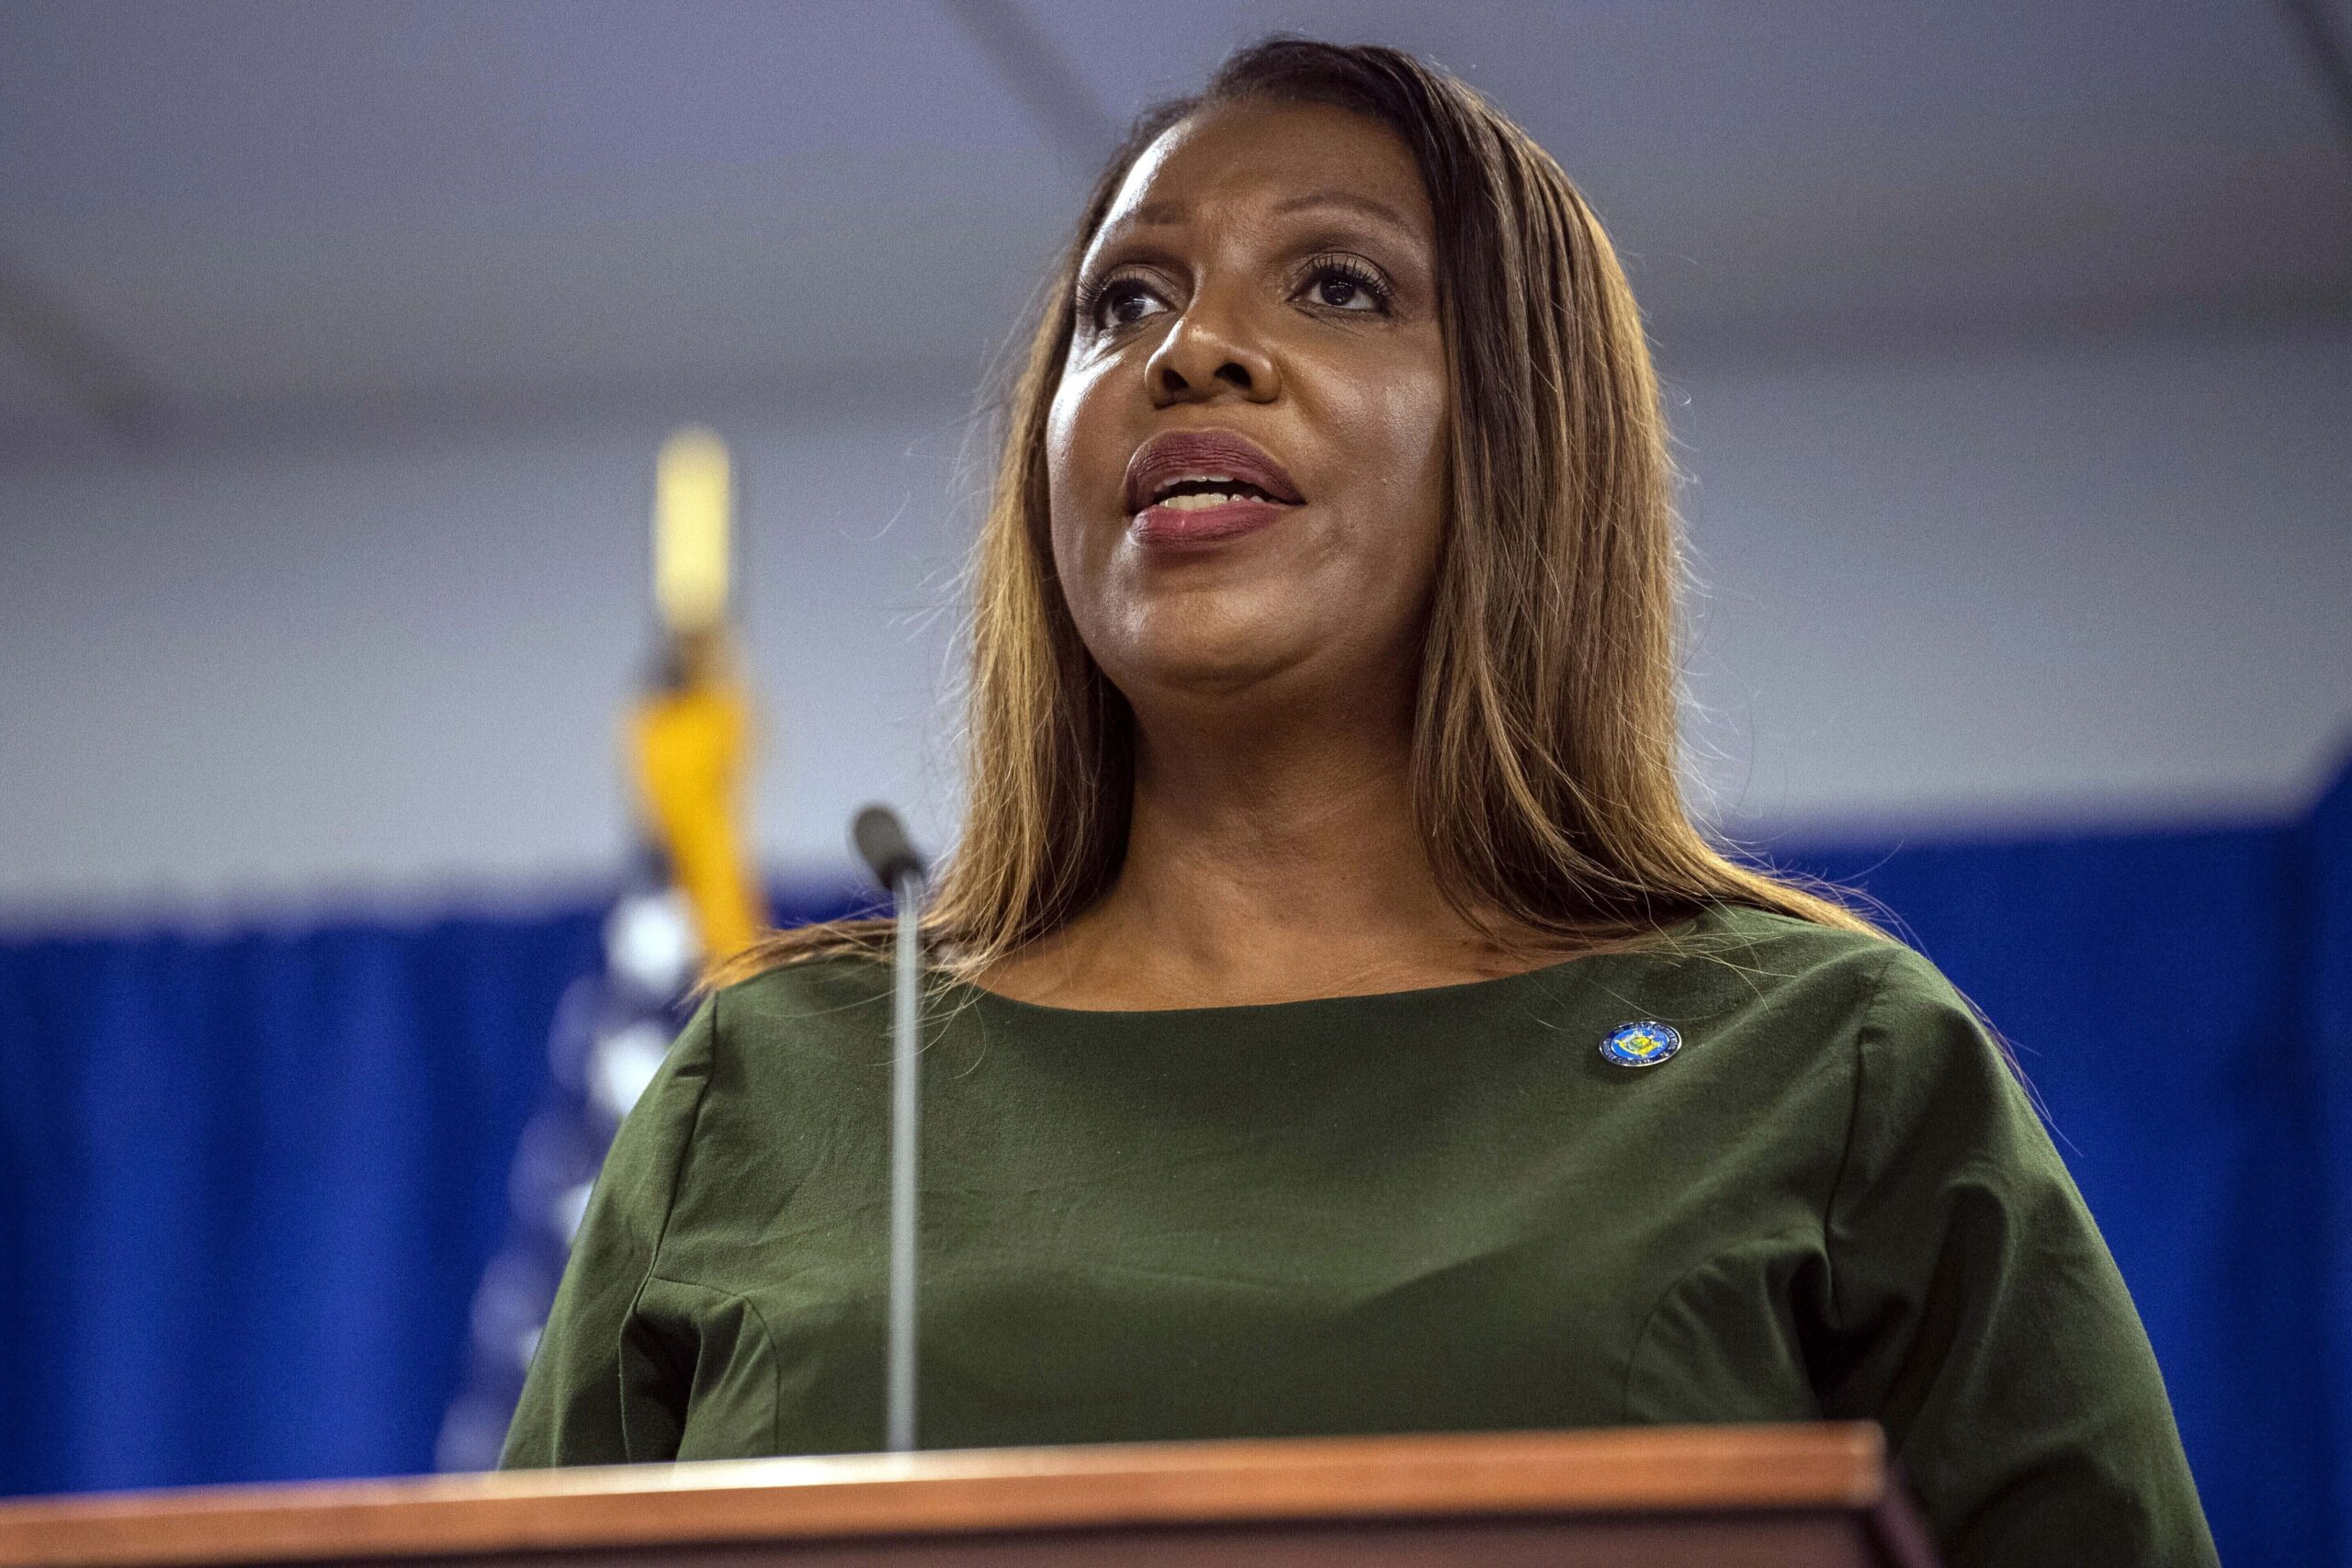 Attorney General Letitia James sent out a press release praising the passage of new legislation aimed at protecting children online. Photo: Bebeto Matthews/AP